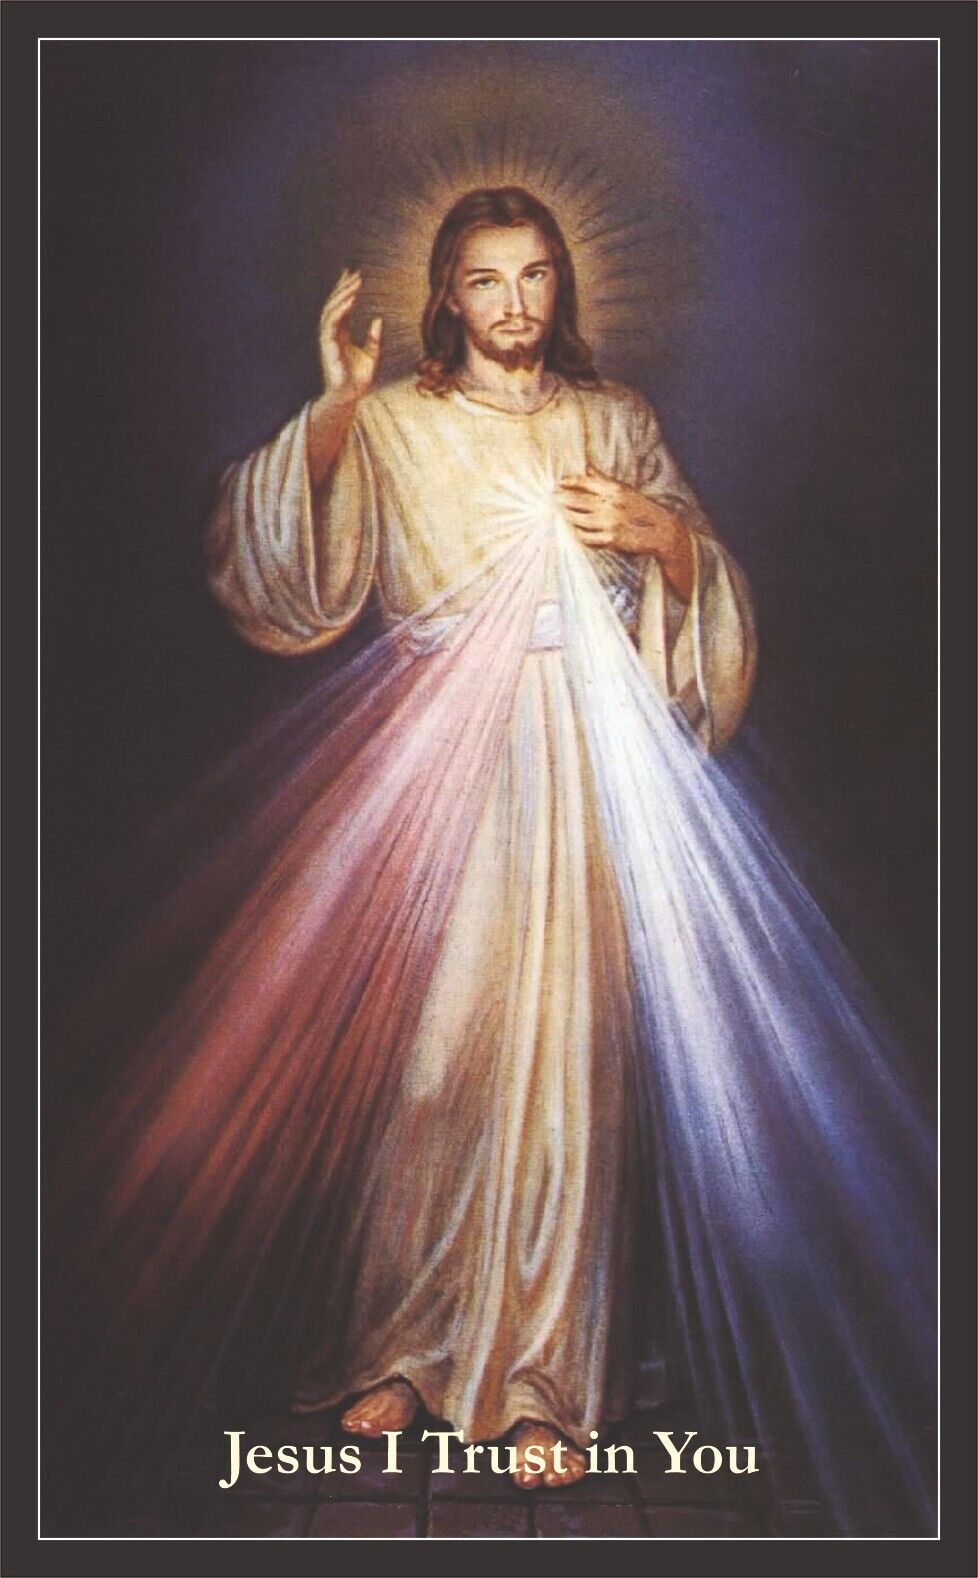 Divine Mercy Laminated Prayer Card, Jesus, I Trust in You, 3x5 inches, 3 pack